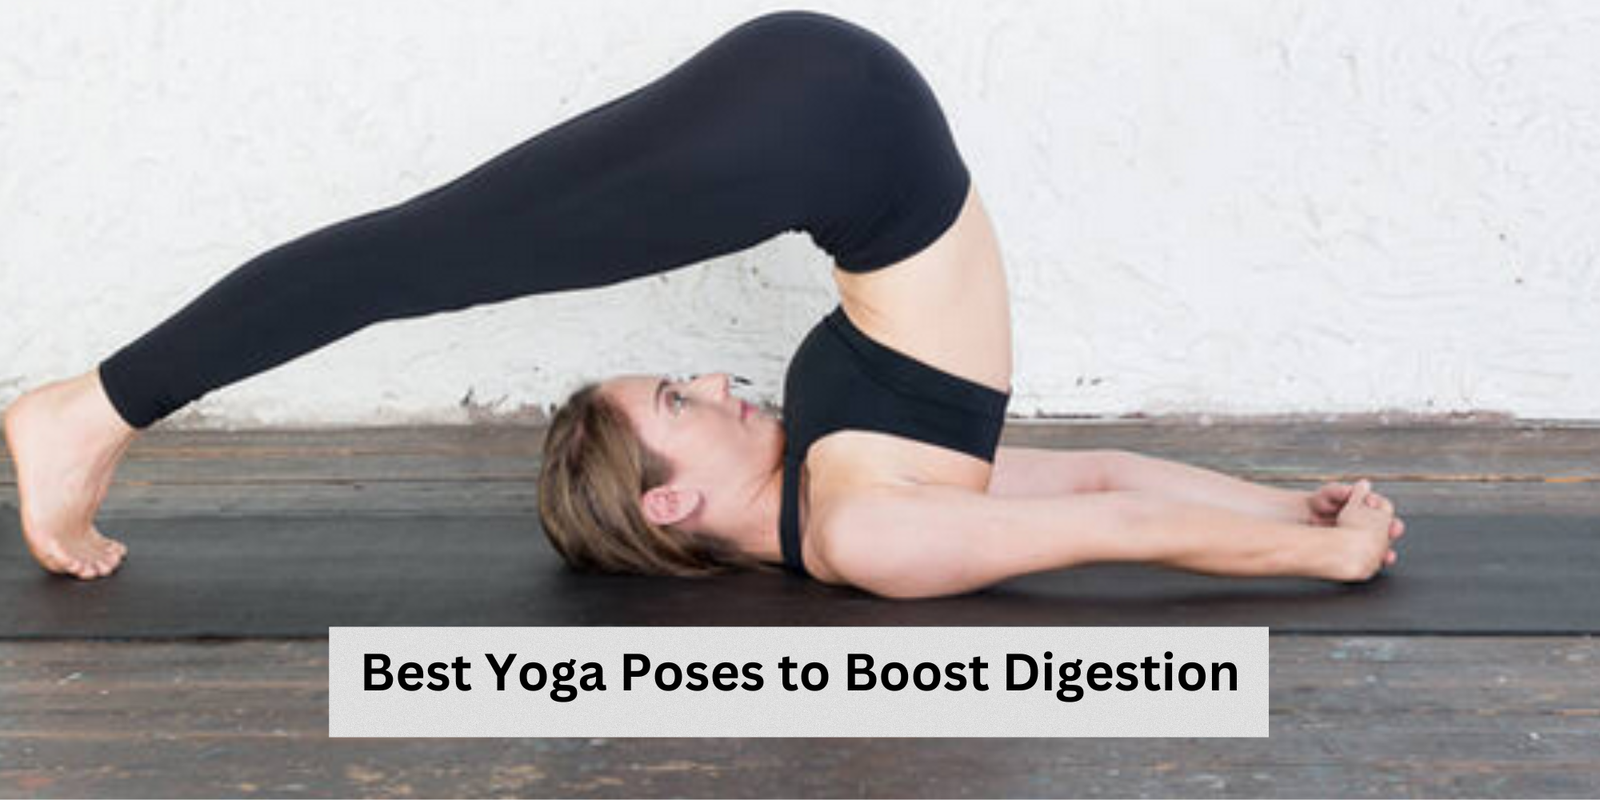 8 Yoga Poses to Boost Digestion & Gut Health